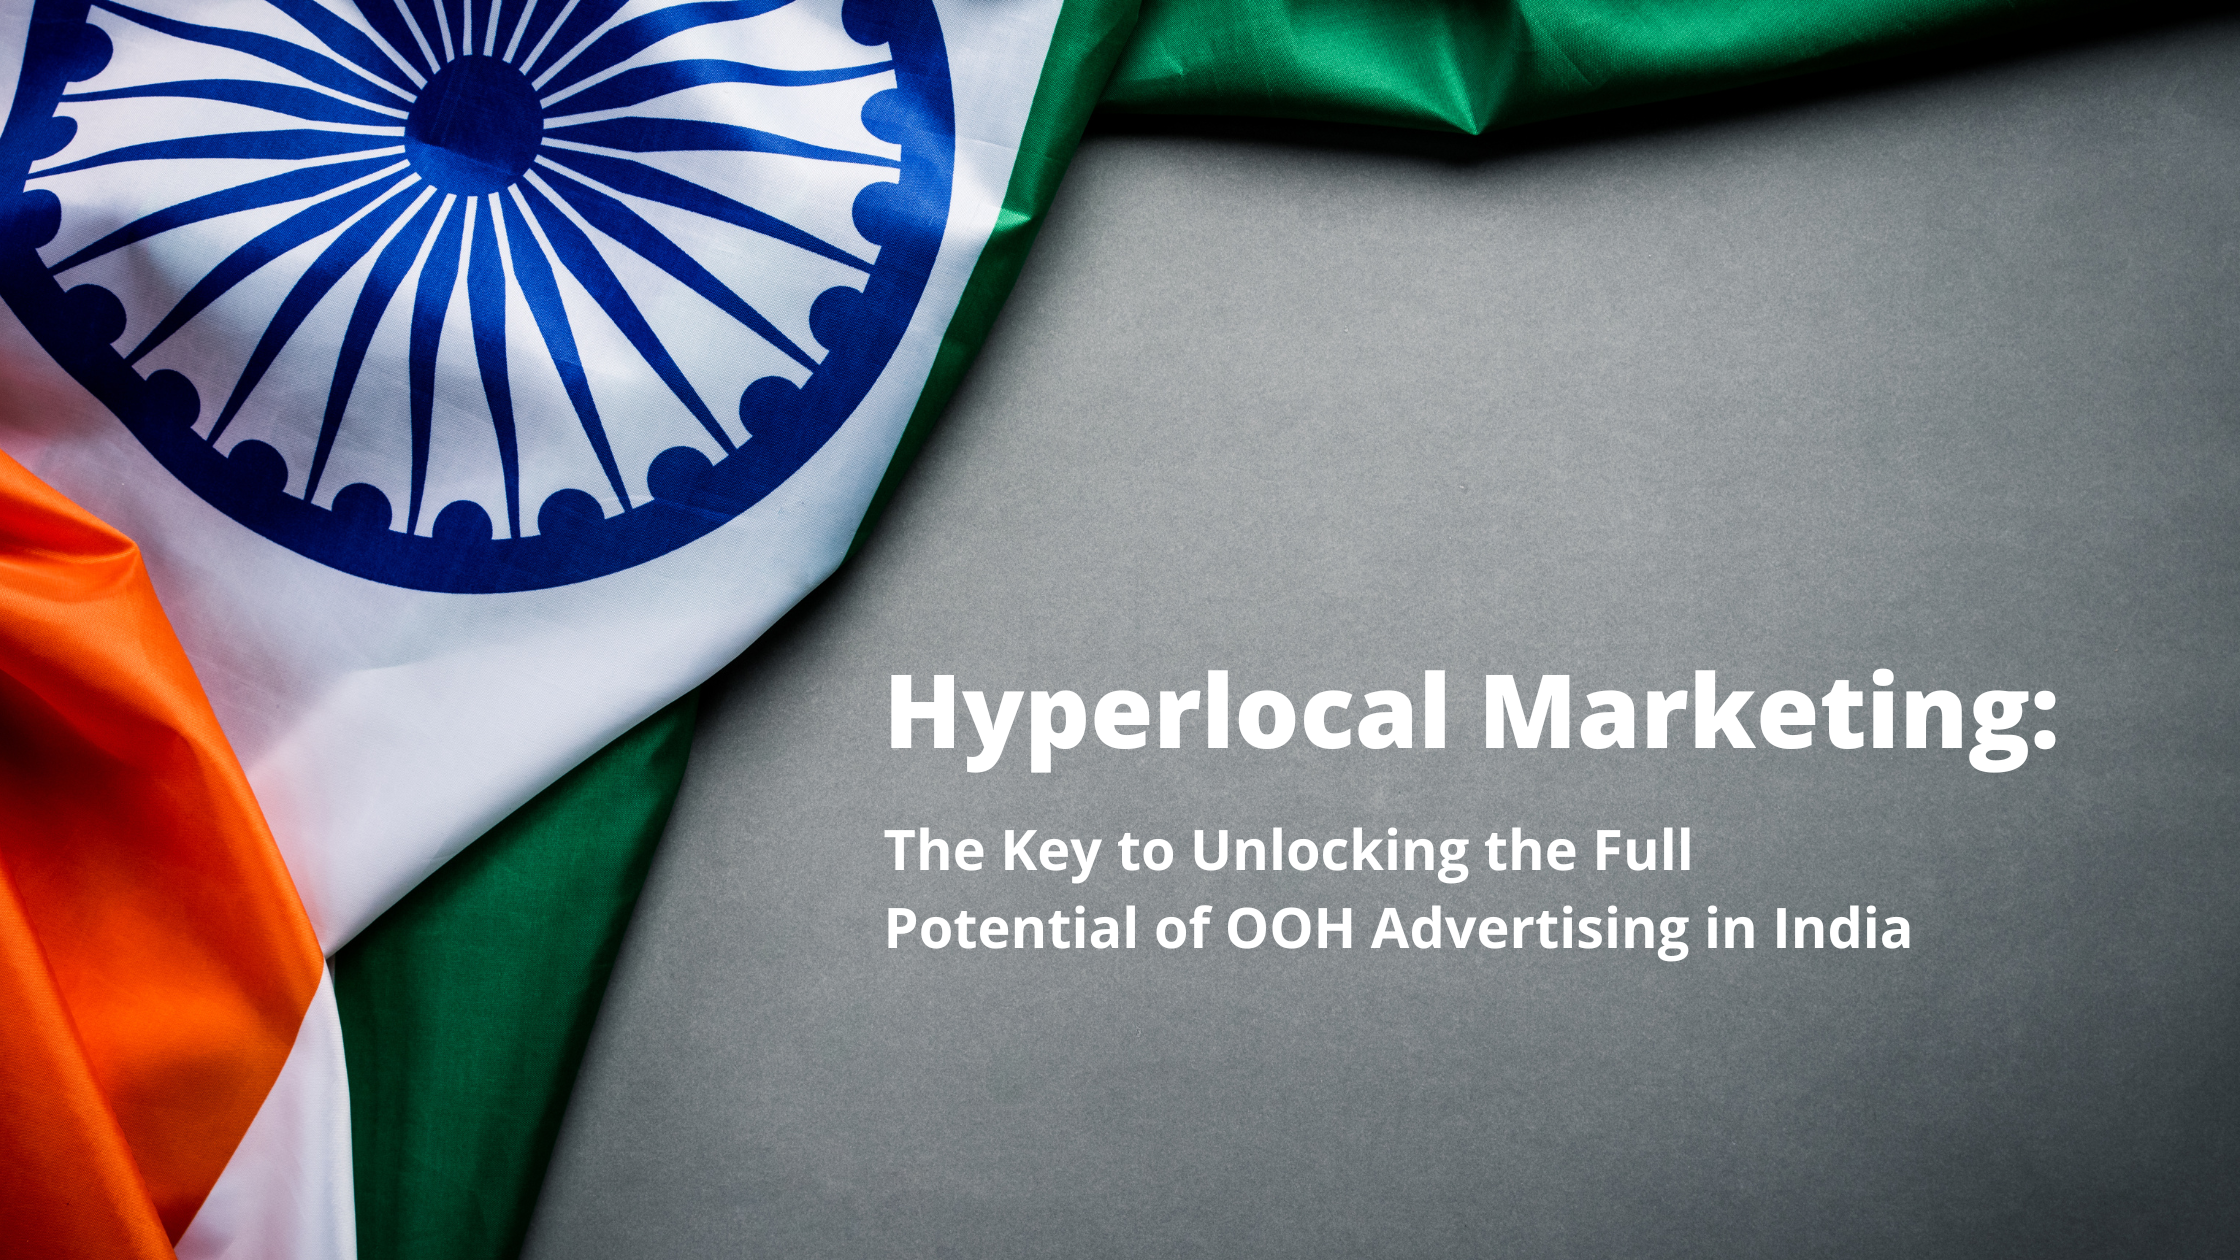 Hyperlocal Marketing: The Key to Unlocking the Full Potential of OOH Advertising in India